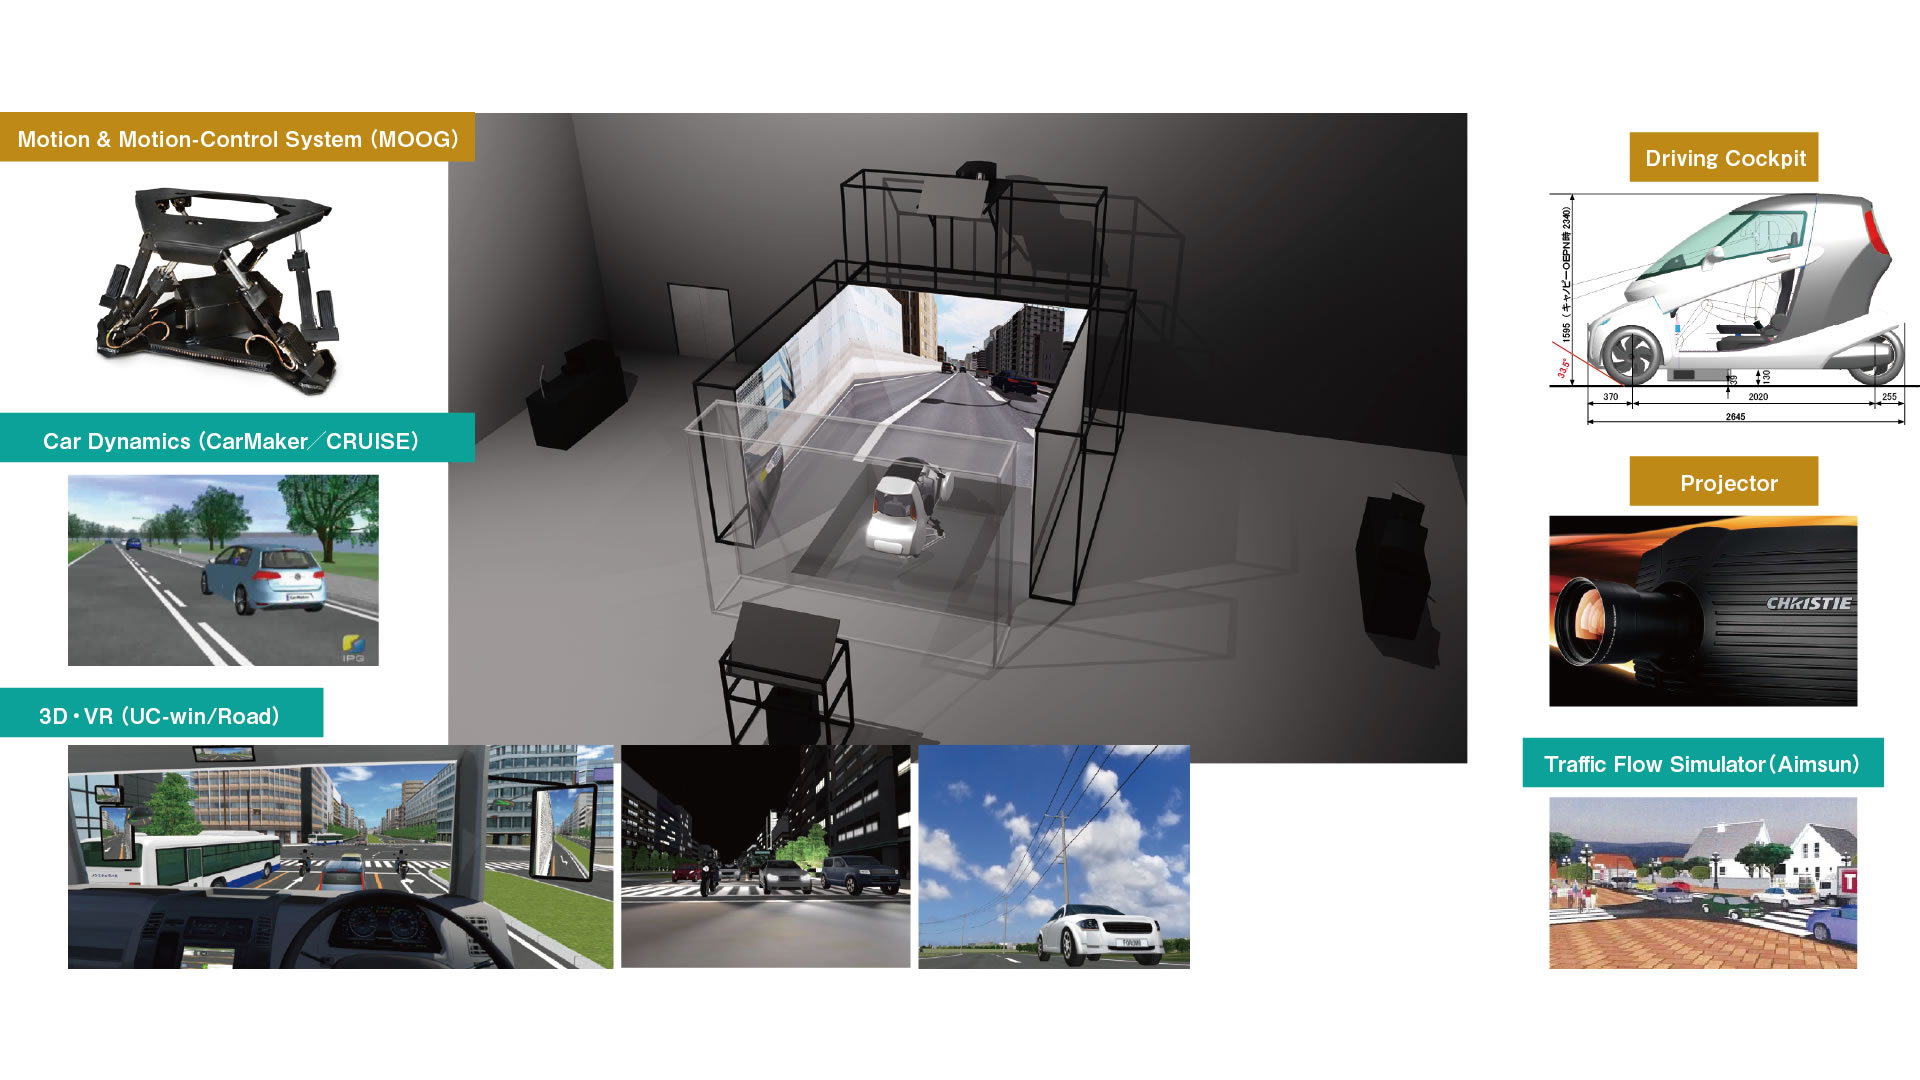 Vehicular Dynamics Research & Evaluation System High-Precision Driving Simulator.